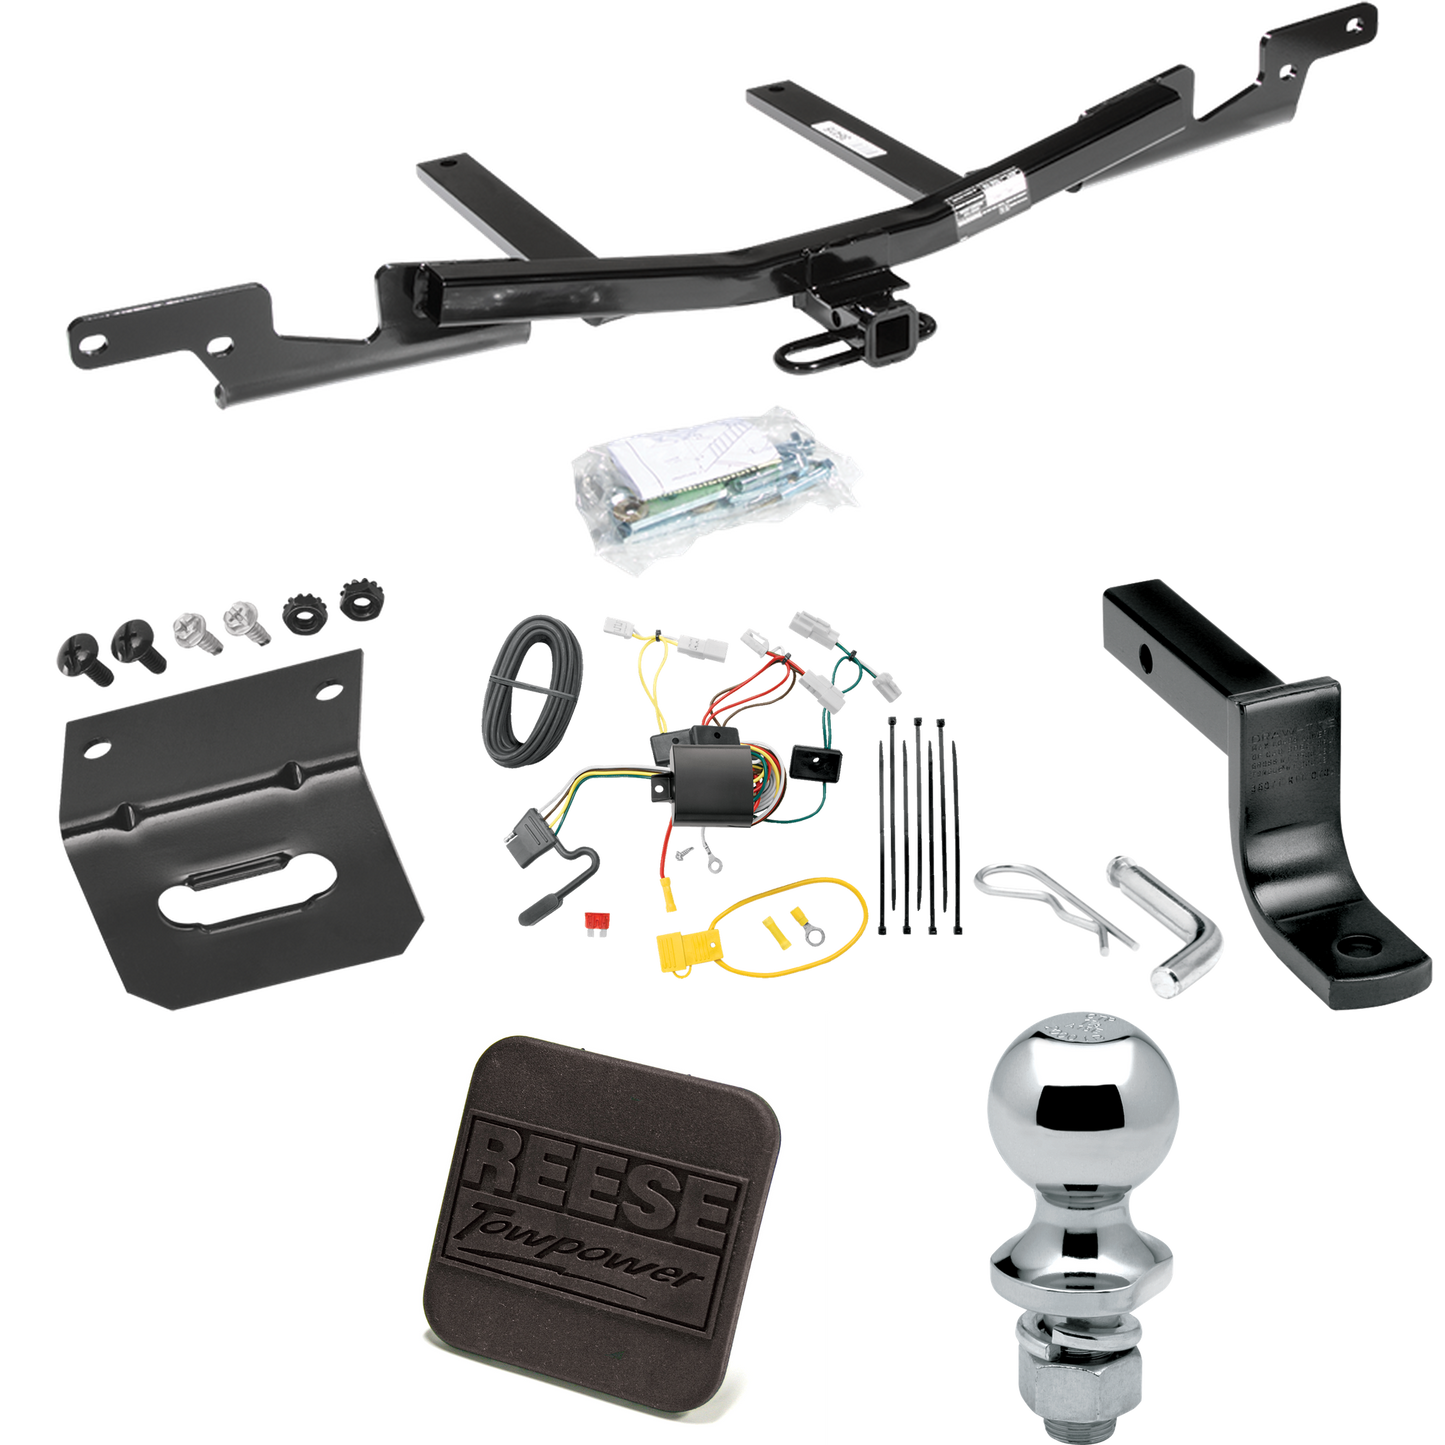 Fits 2007-2009 Toyota Camry Trailer Hitch Tow PKG w/ 4-Flat Wiring Harness + Draw-Bar + 1-7/8" Ball + Wiring Bracket + Hitch Cover (For Sedan, Except Hybrid Models) By Reese Towpower